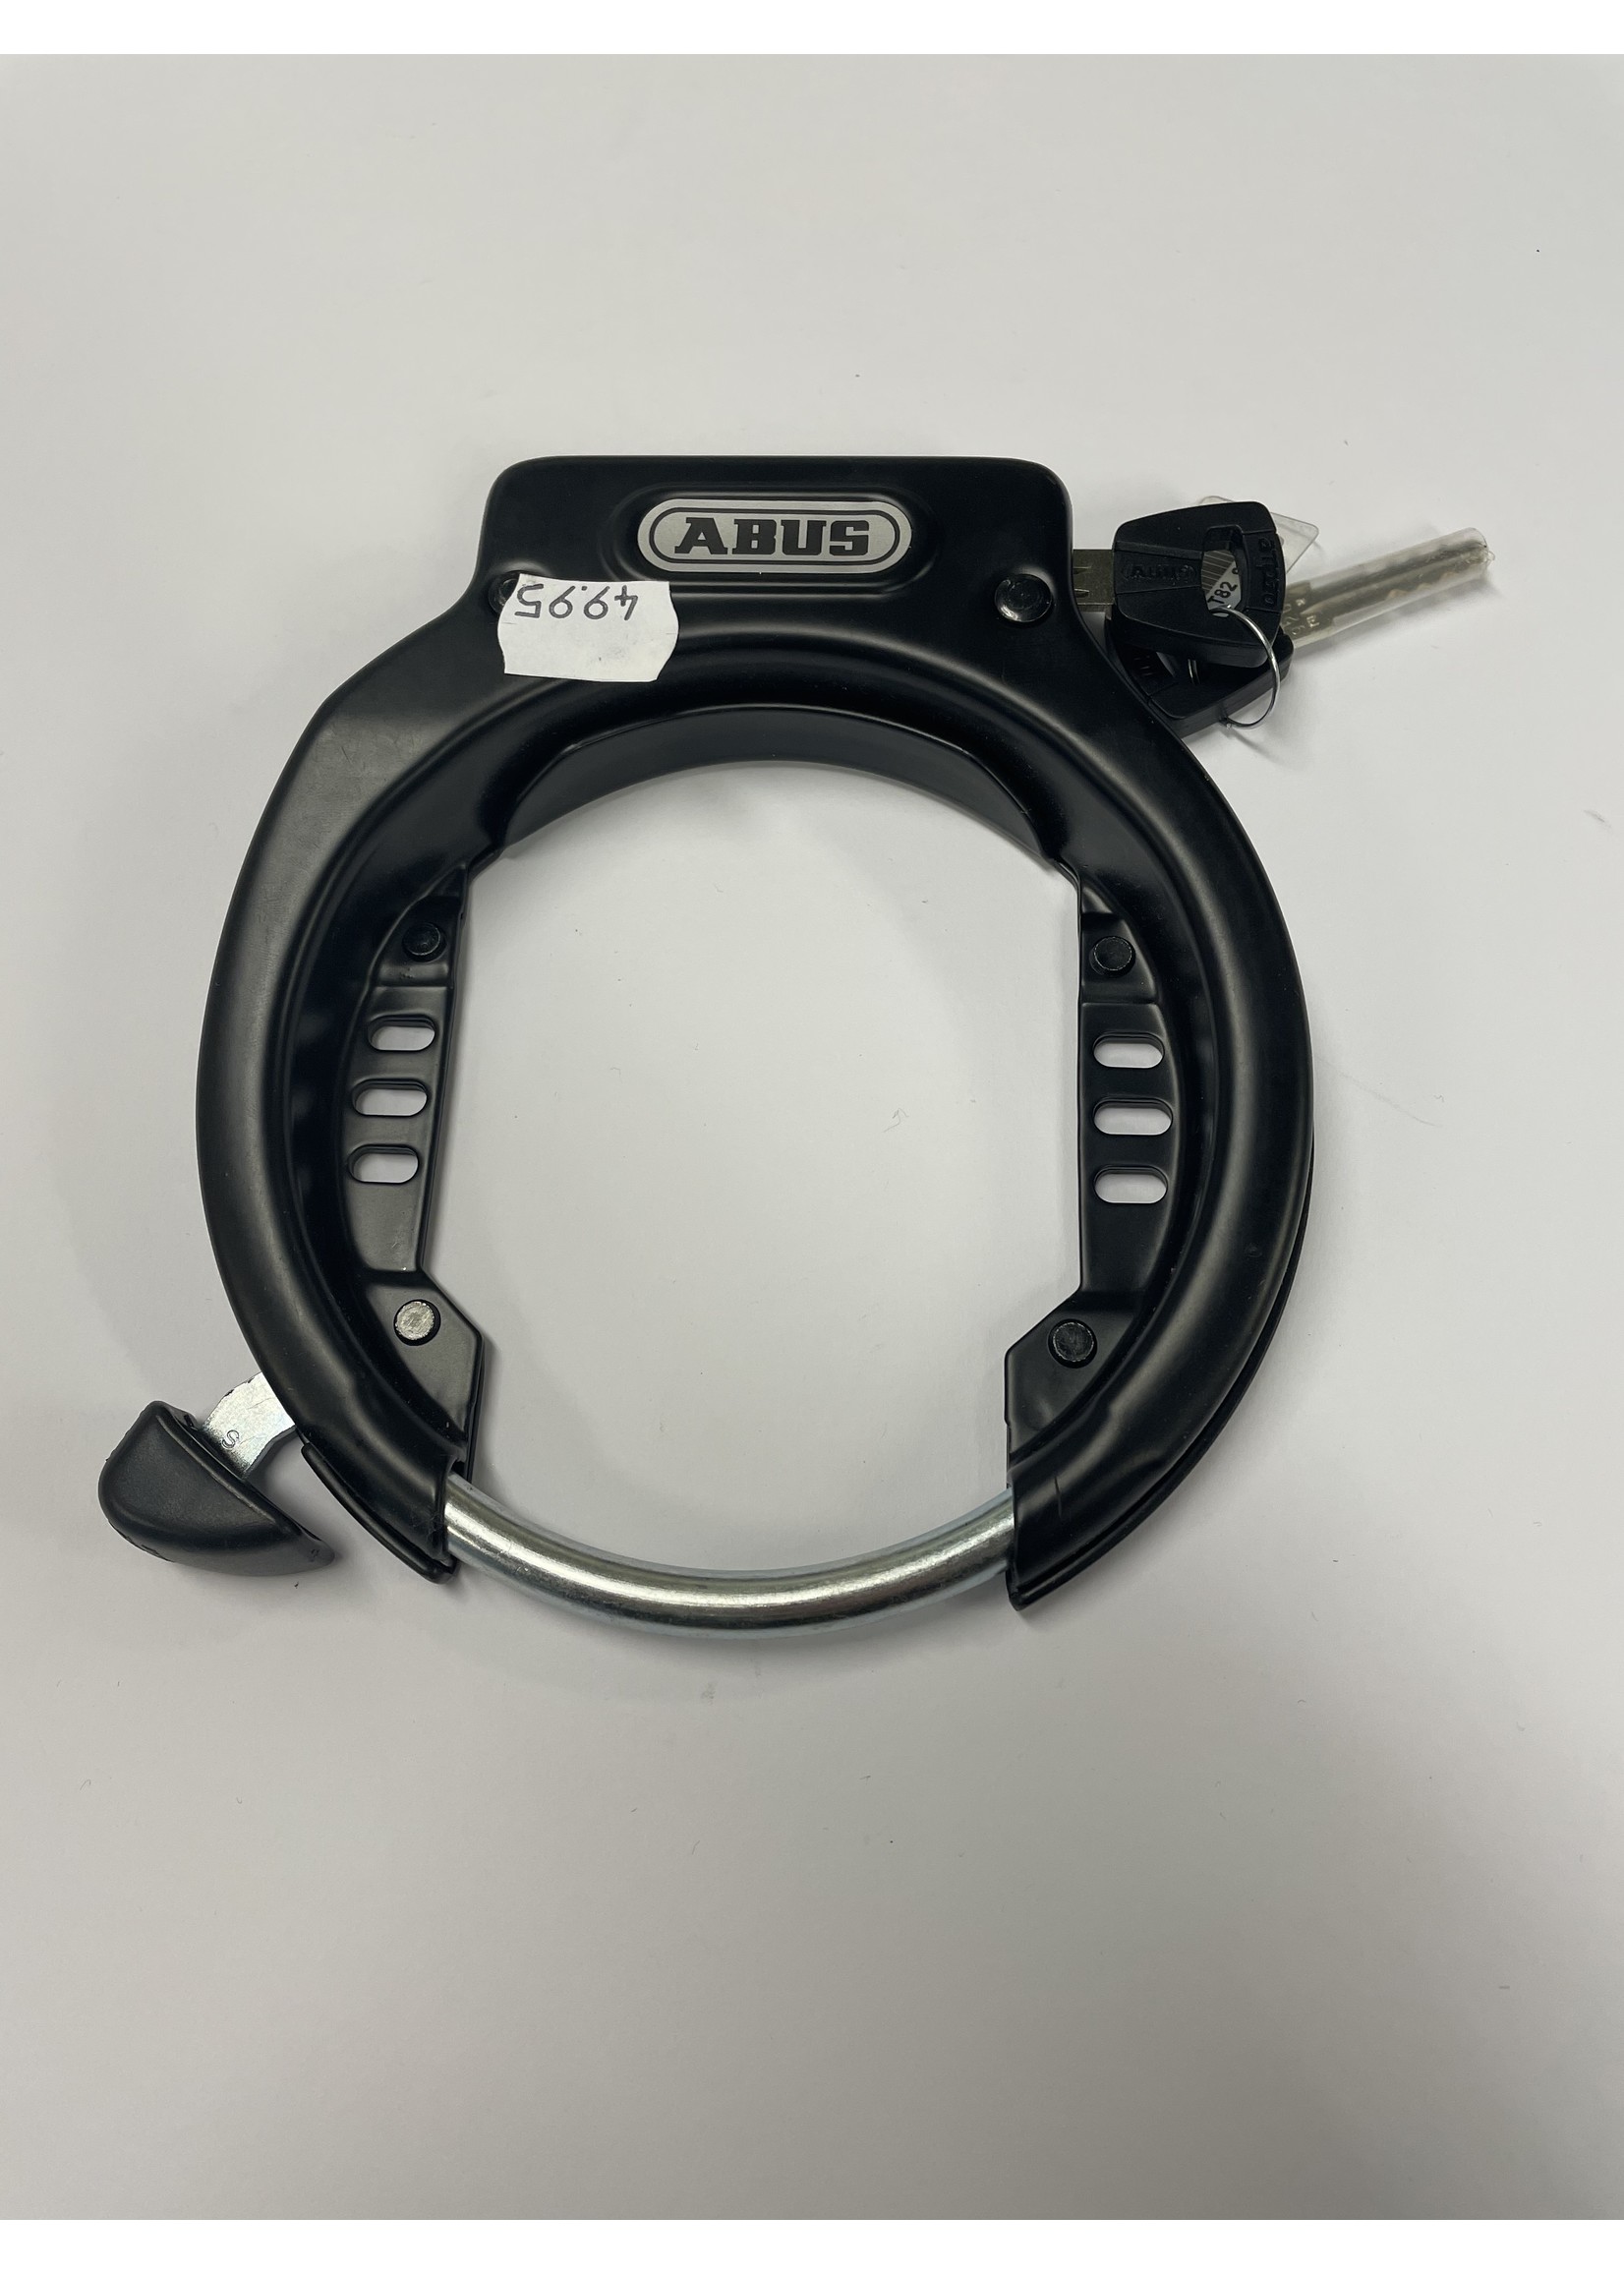 Abus slot extra wide